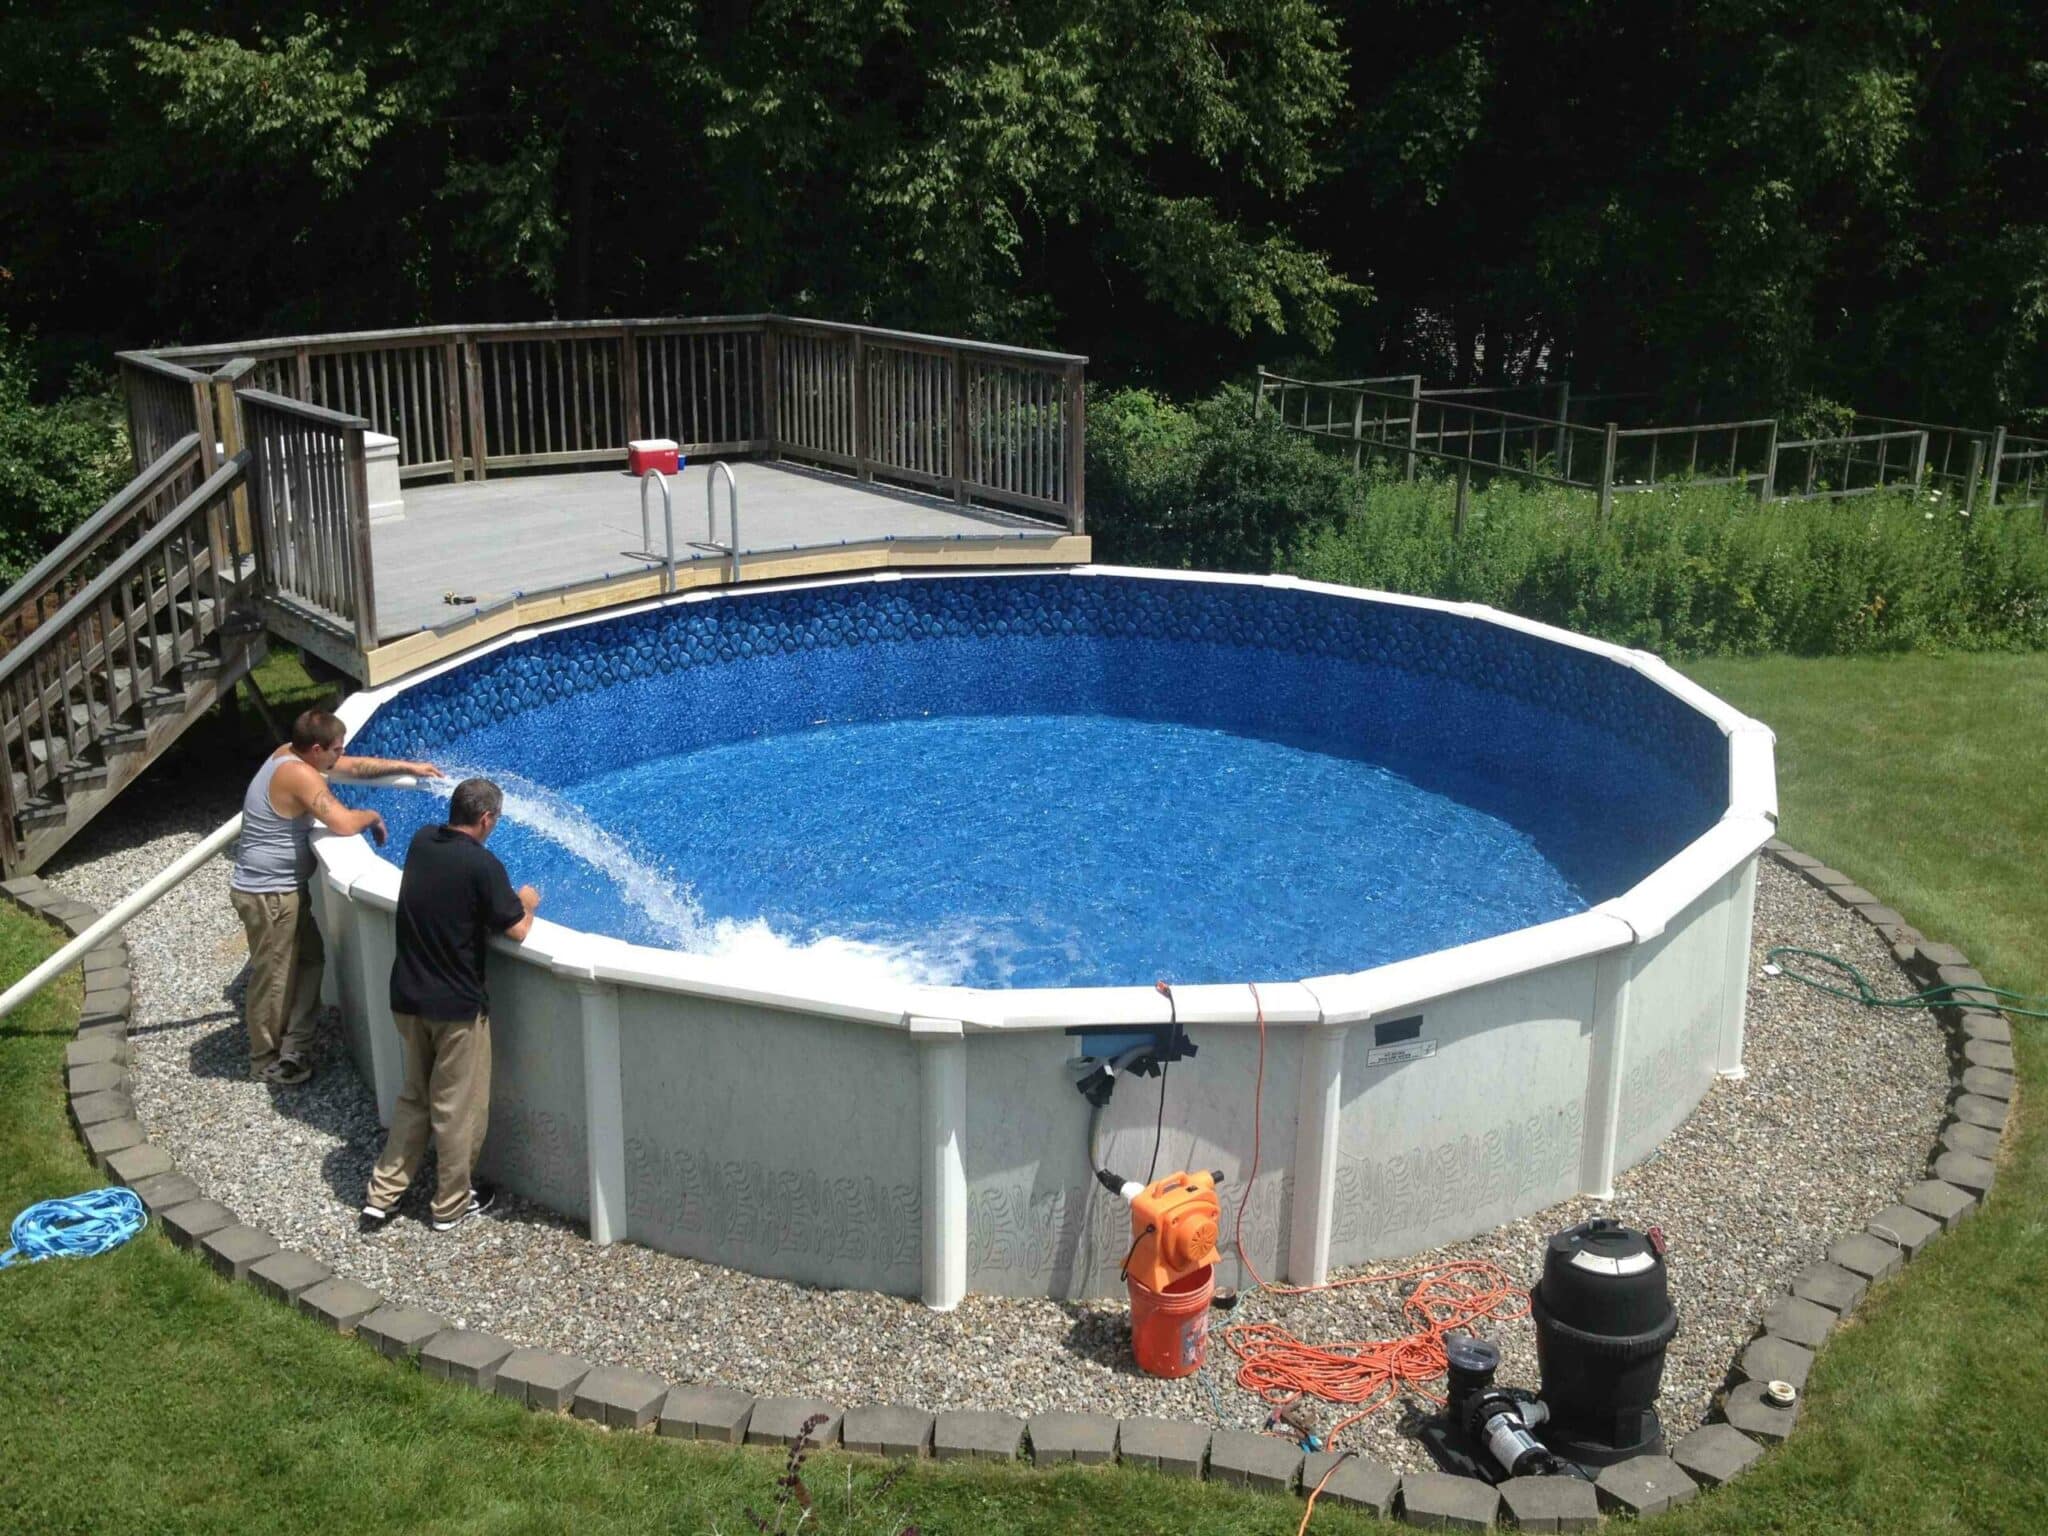 Can You Put An Above Ground Pool on Gravel?